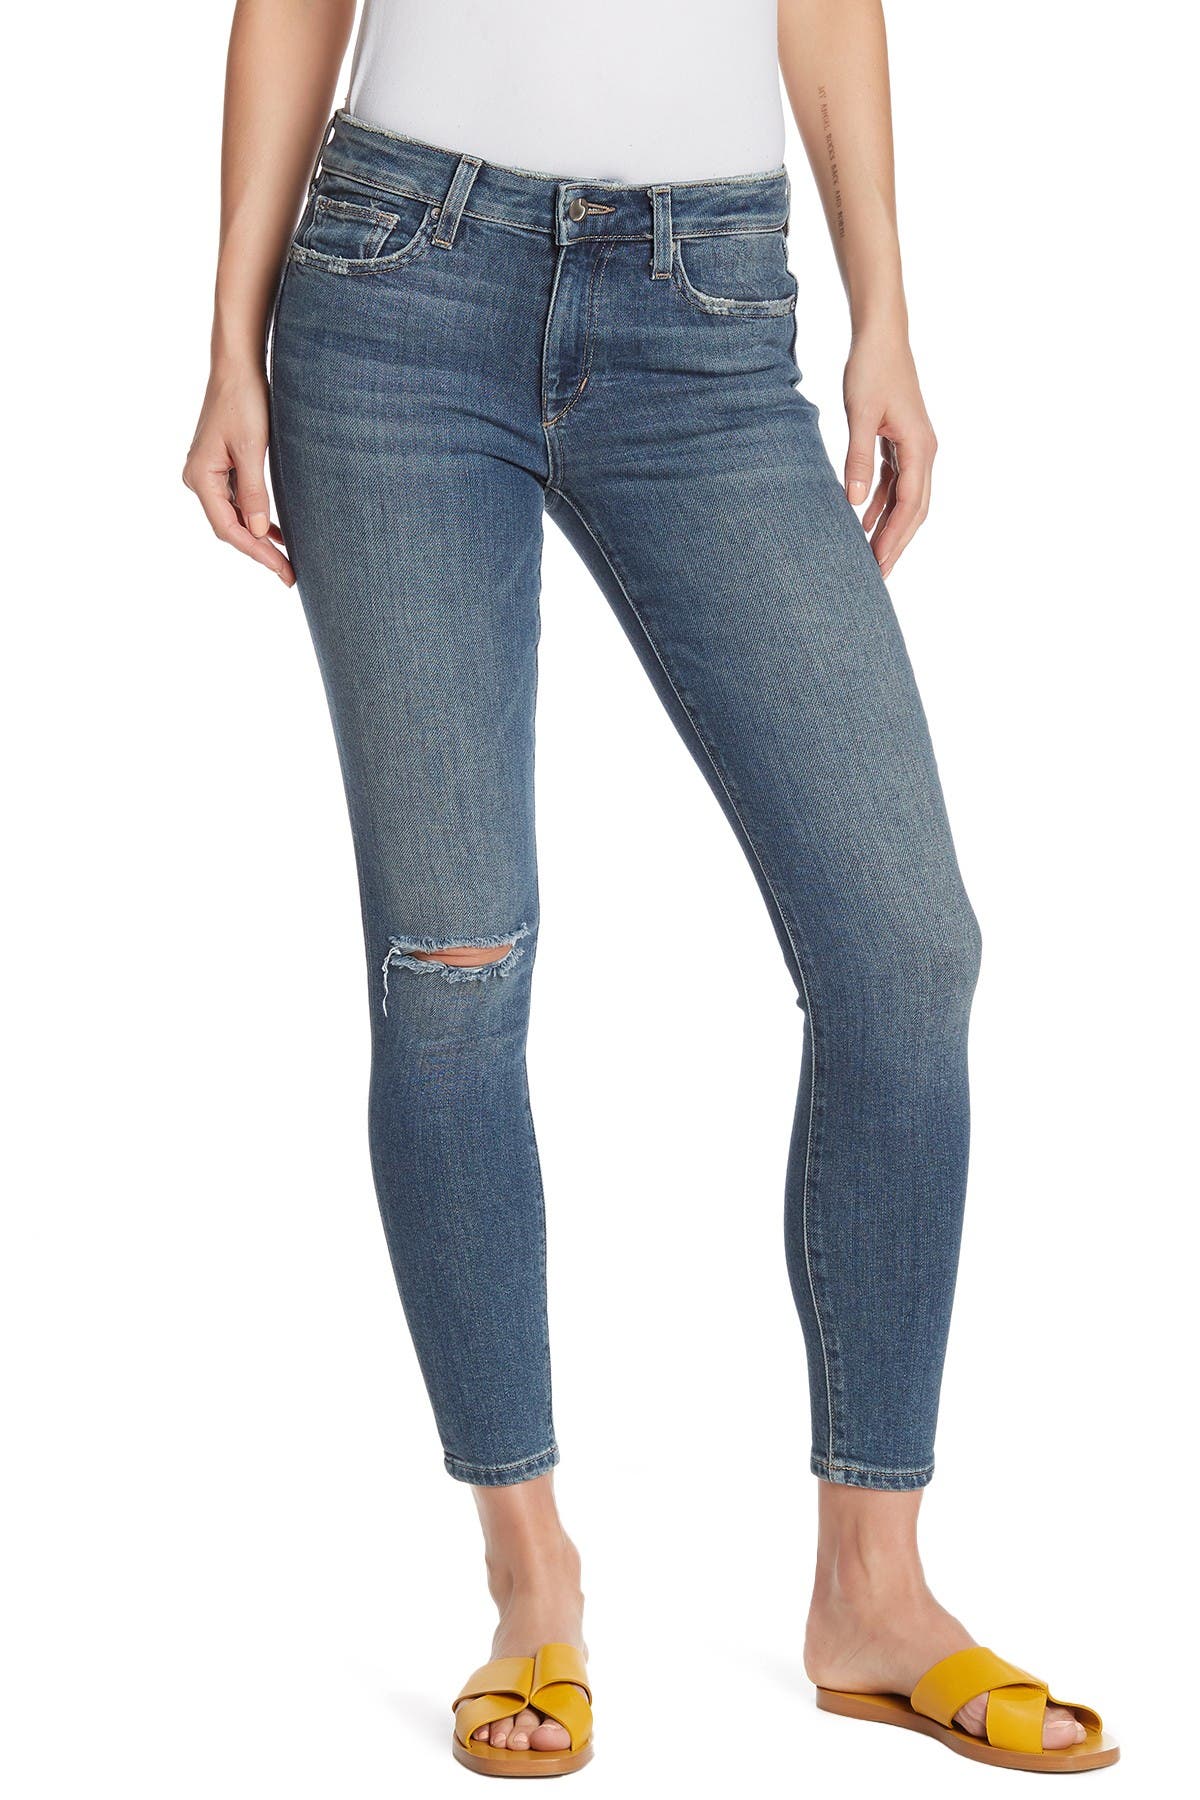 joe's jeans the icon mid rise skinny ankle jean